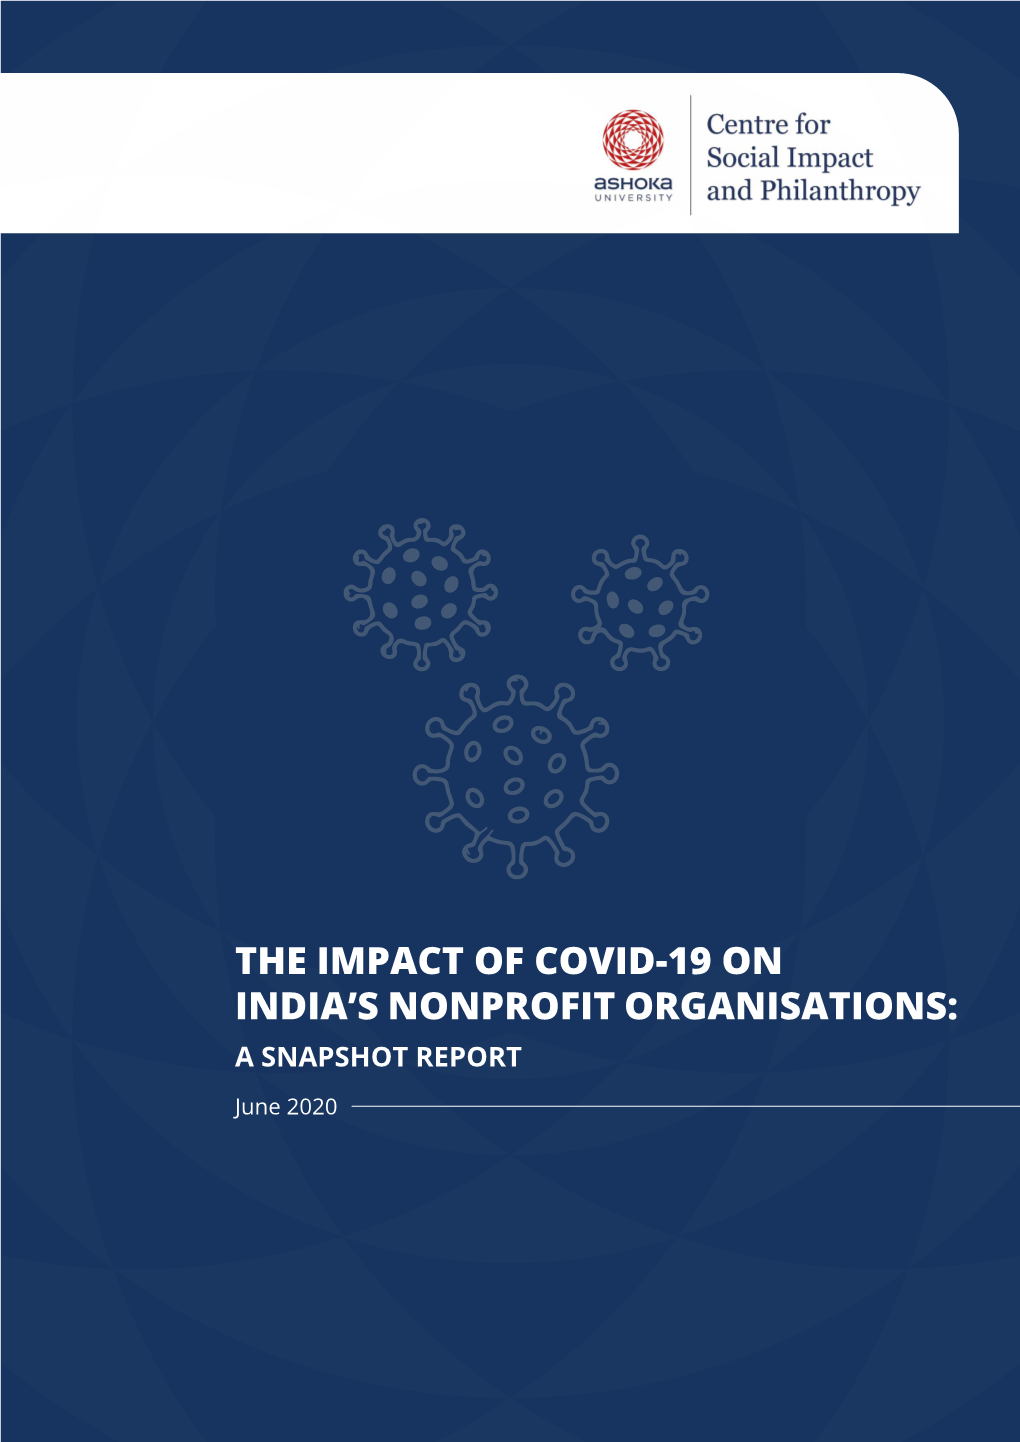 The Impact of COVID-19 on India's Nonprofit Organisations.Pdf 486.44